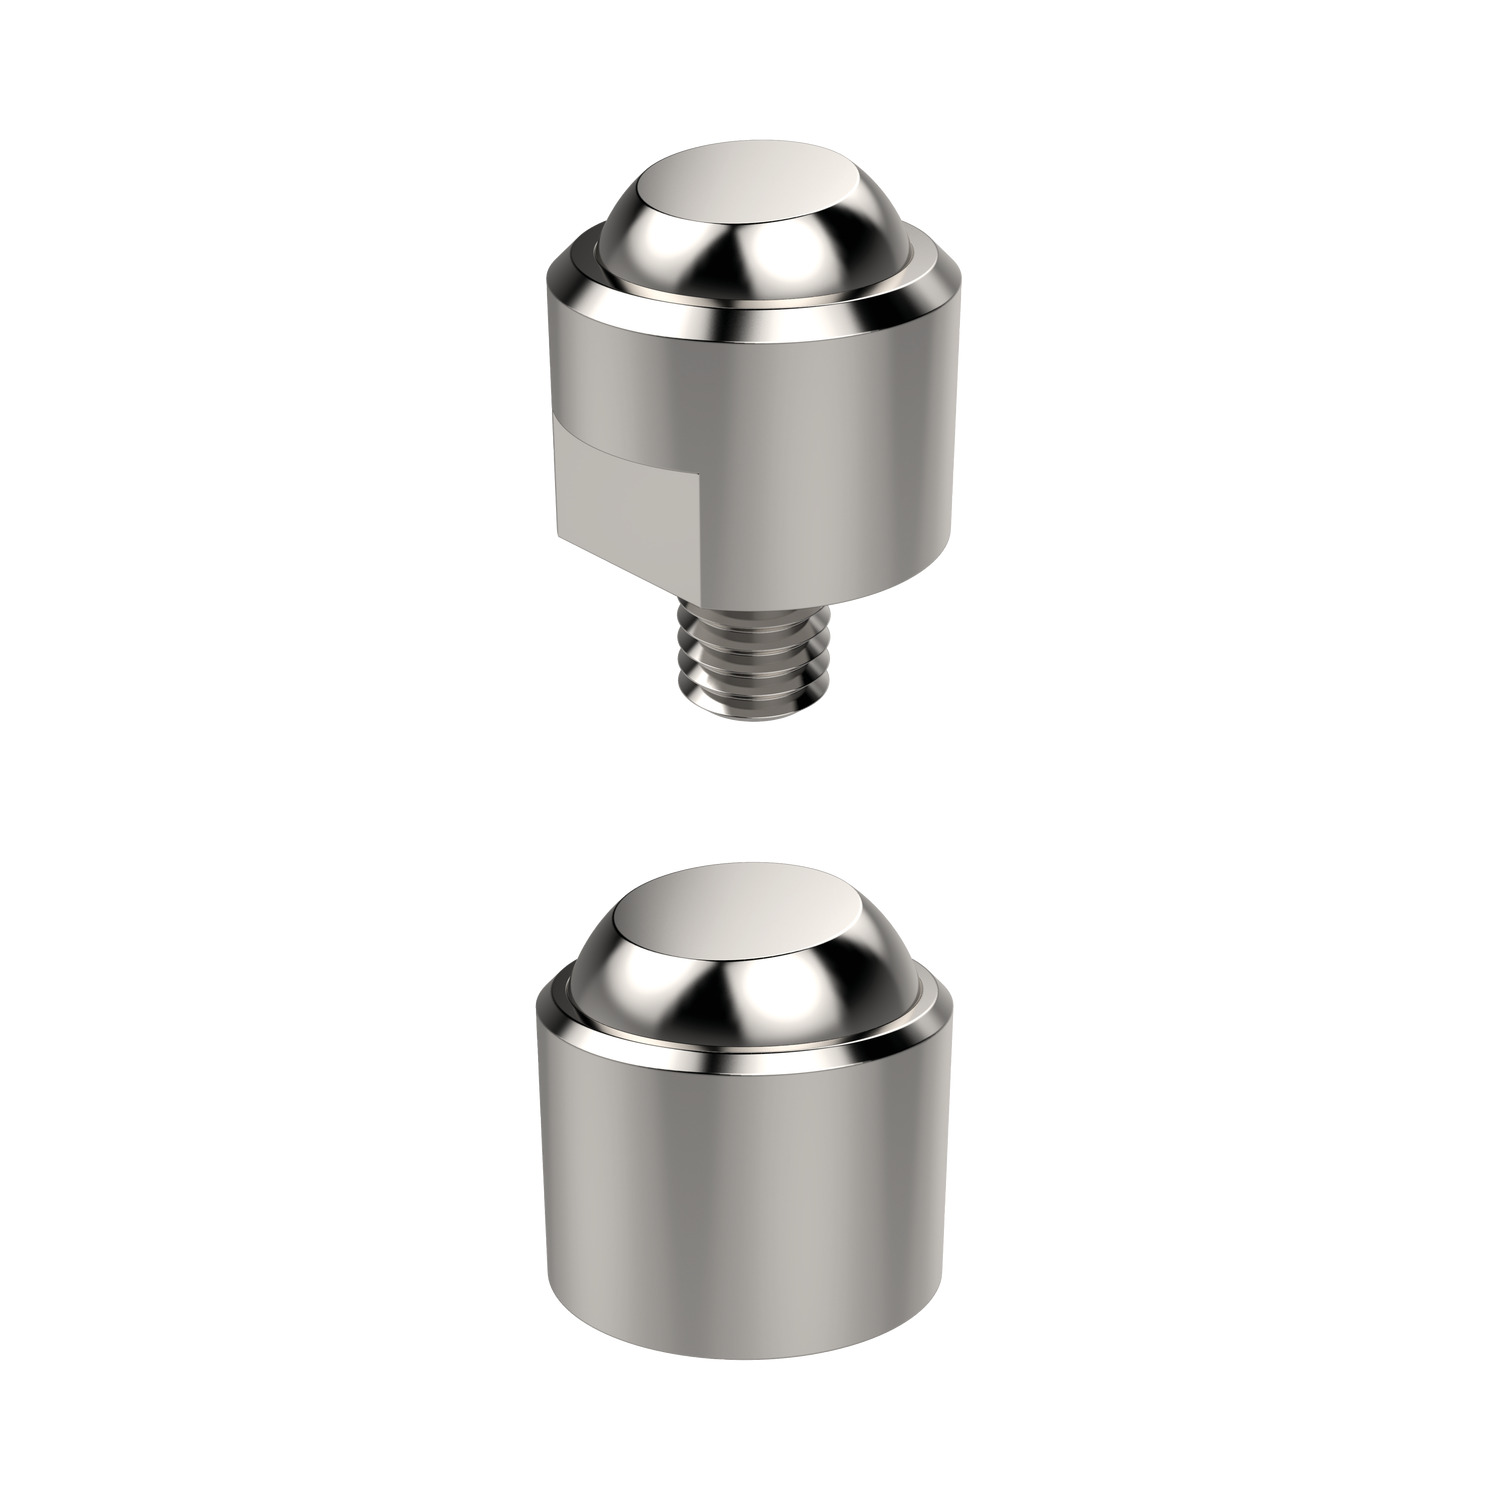 Self-Aligning Pads Flat stainless pads housed in a fully stainless male or female body to suit. Balls are secured against turning and can also be fitted to existing clamping elements.